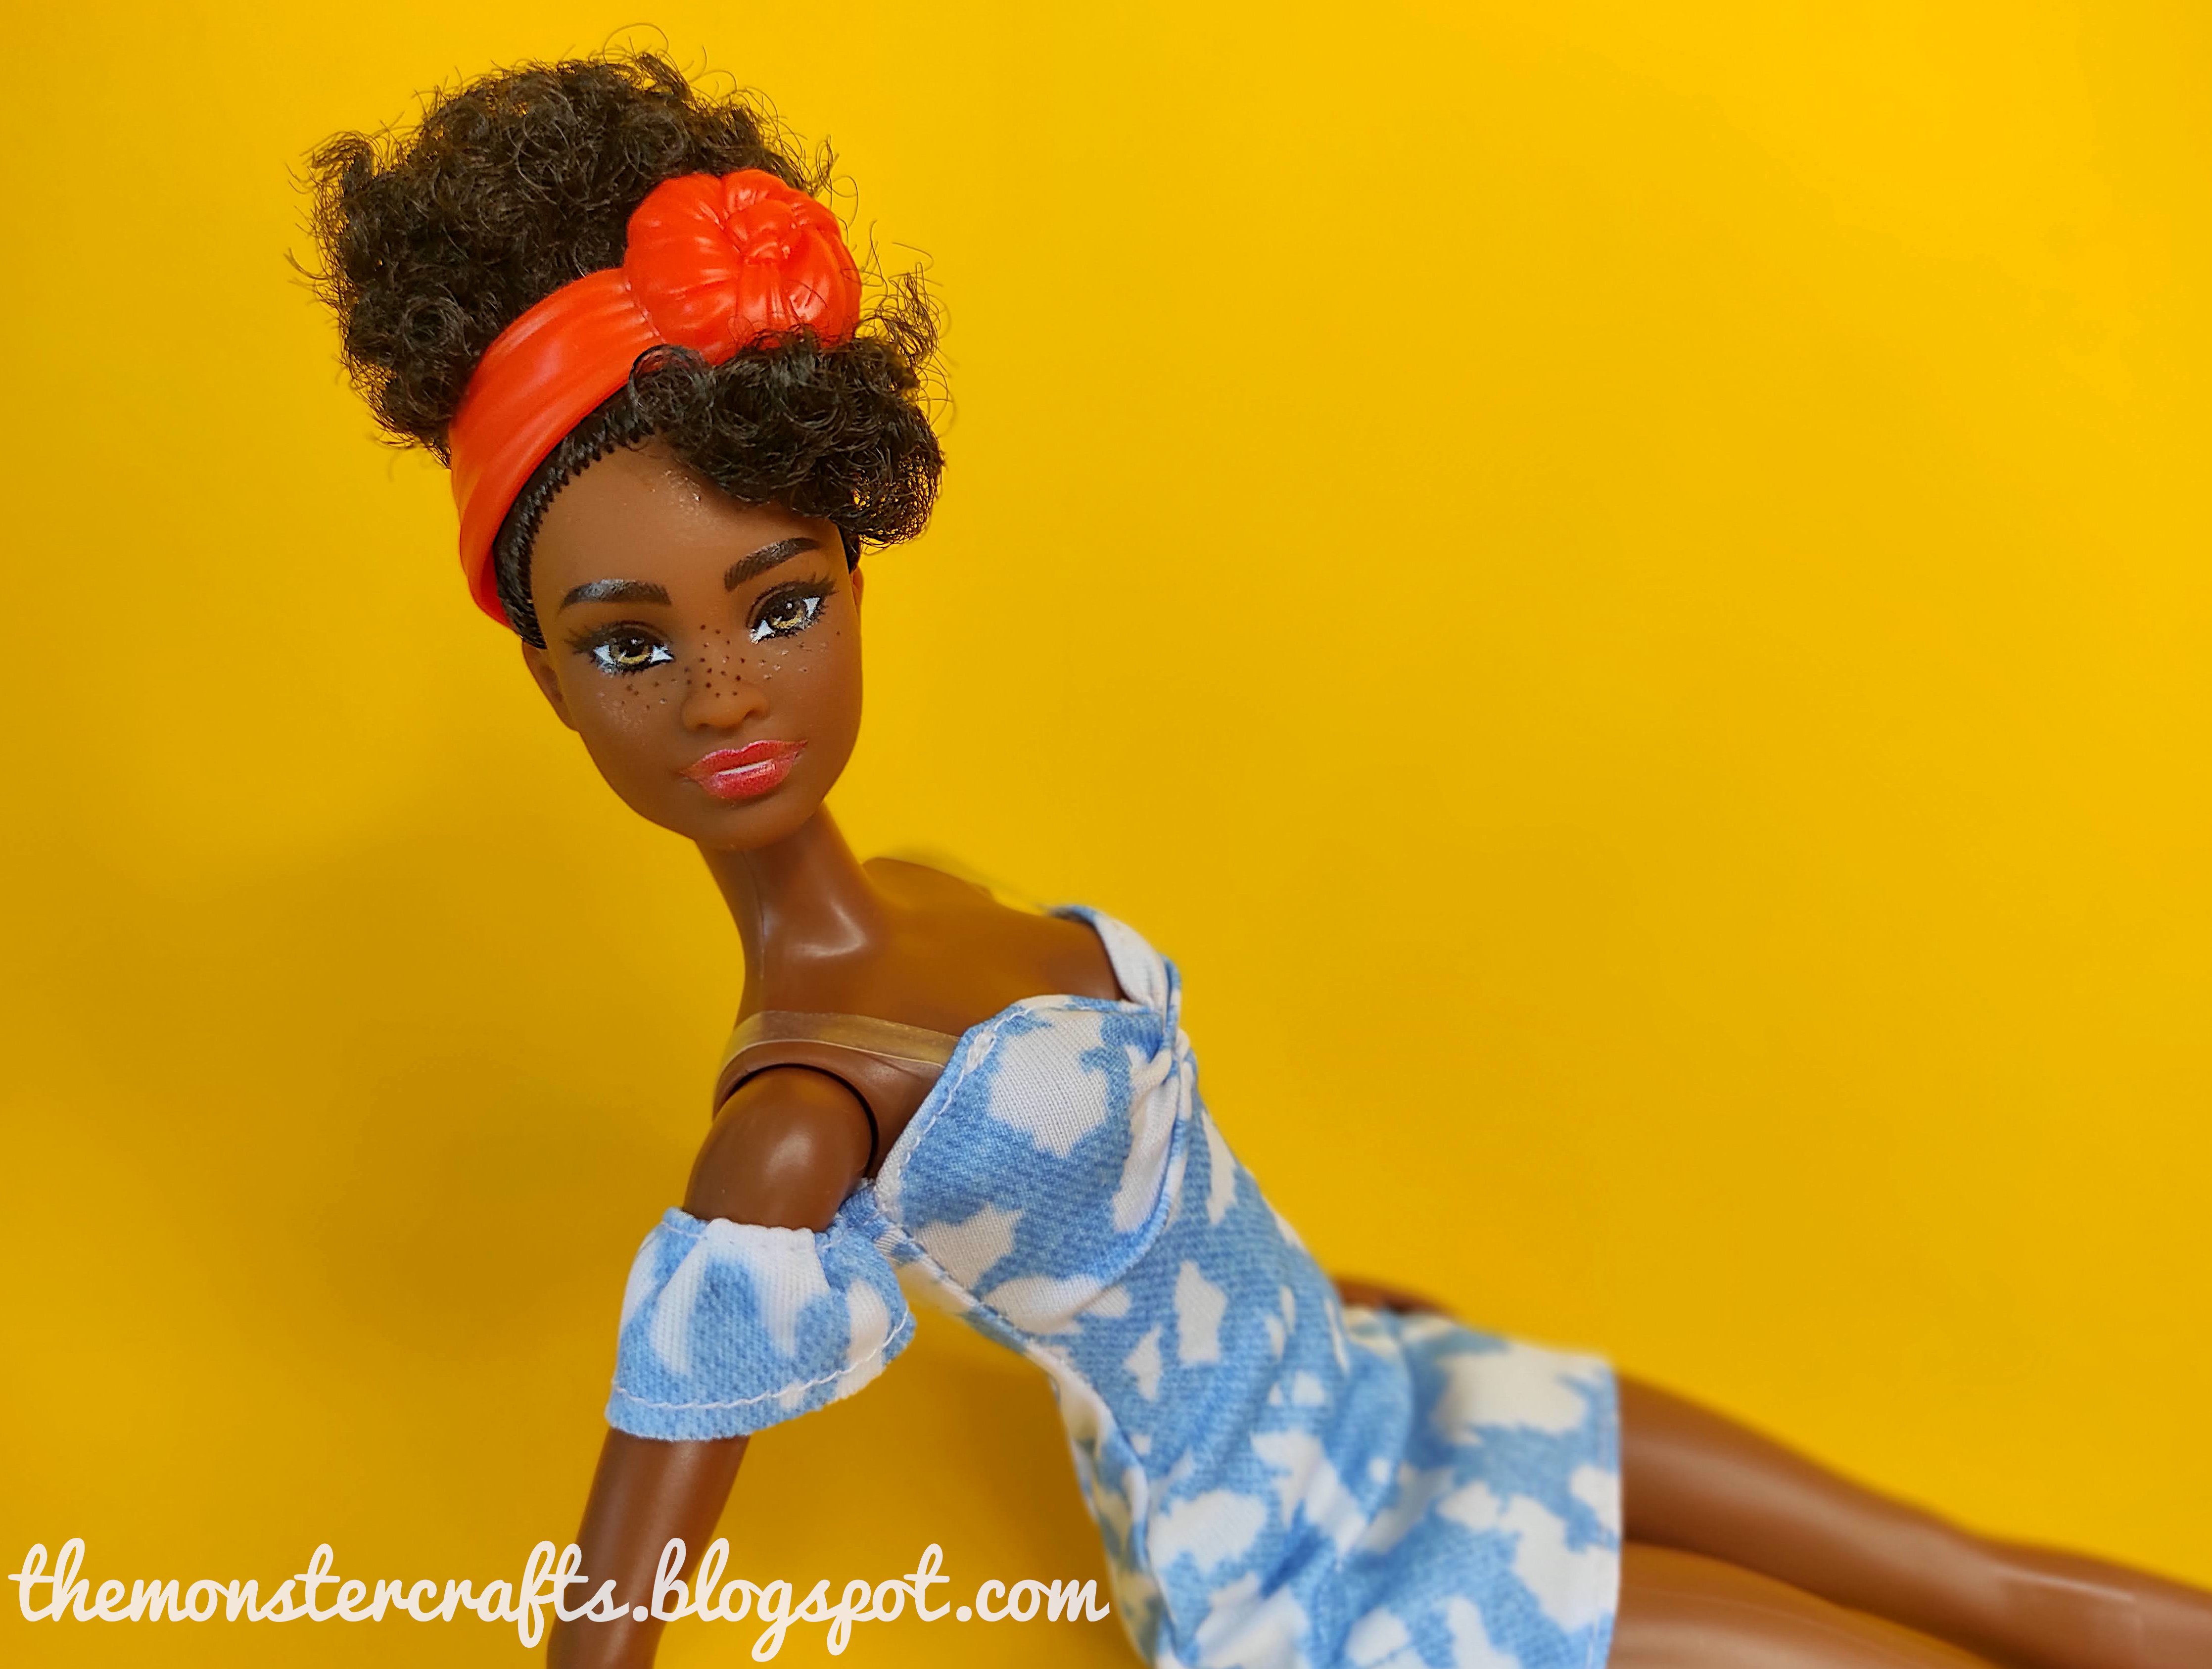 New doll: Barbie Fashionista 185 (curly hair and freckles)